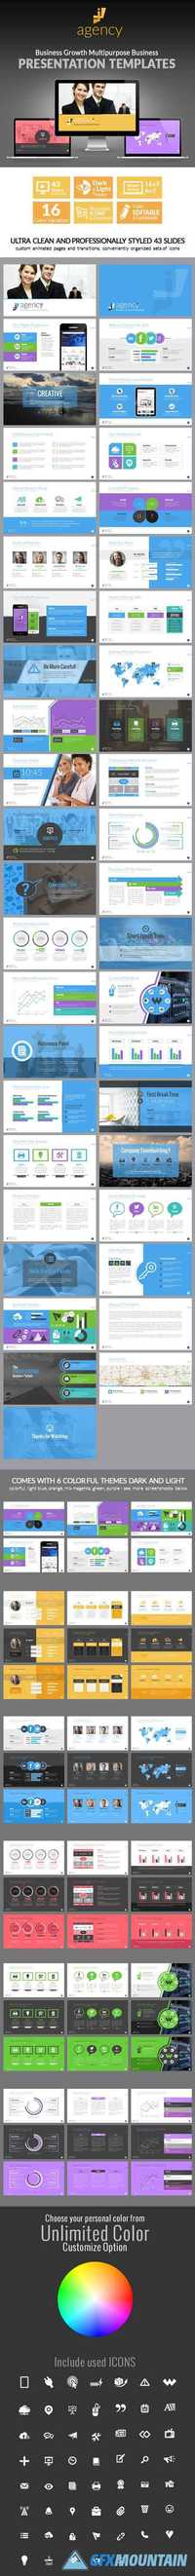 Business Growth Presentation Template 8206060